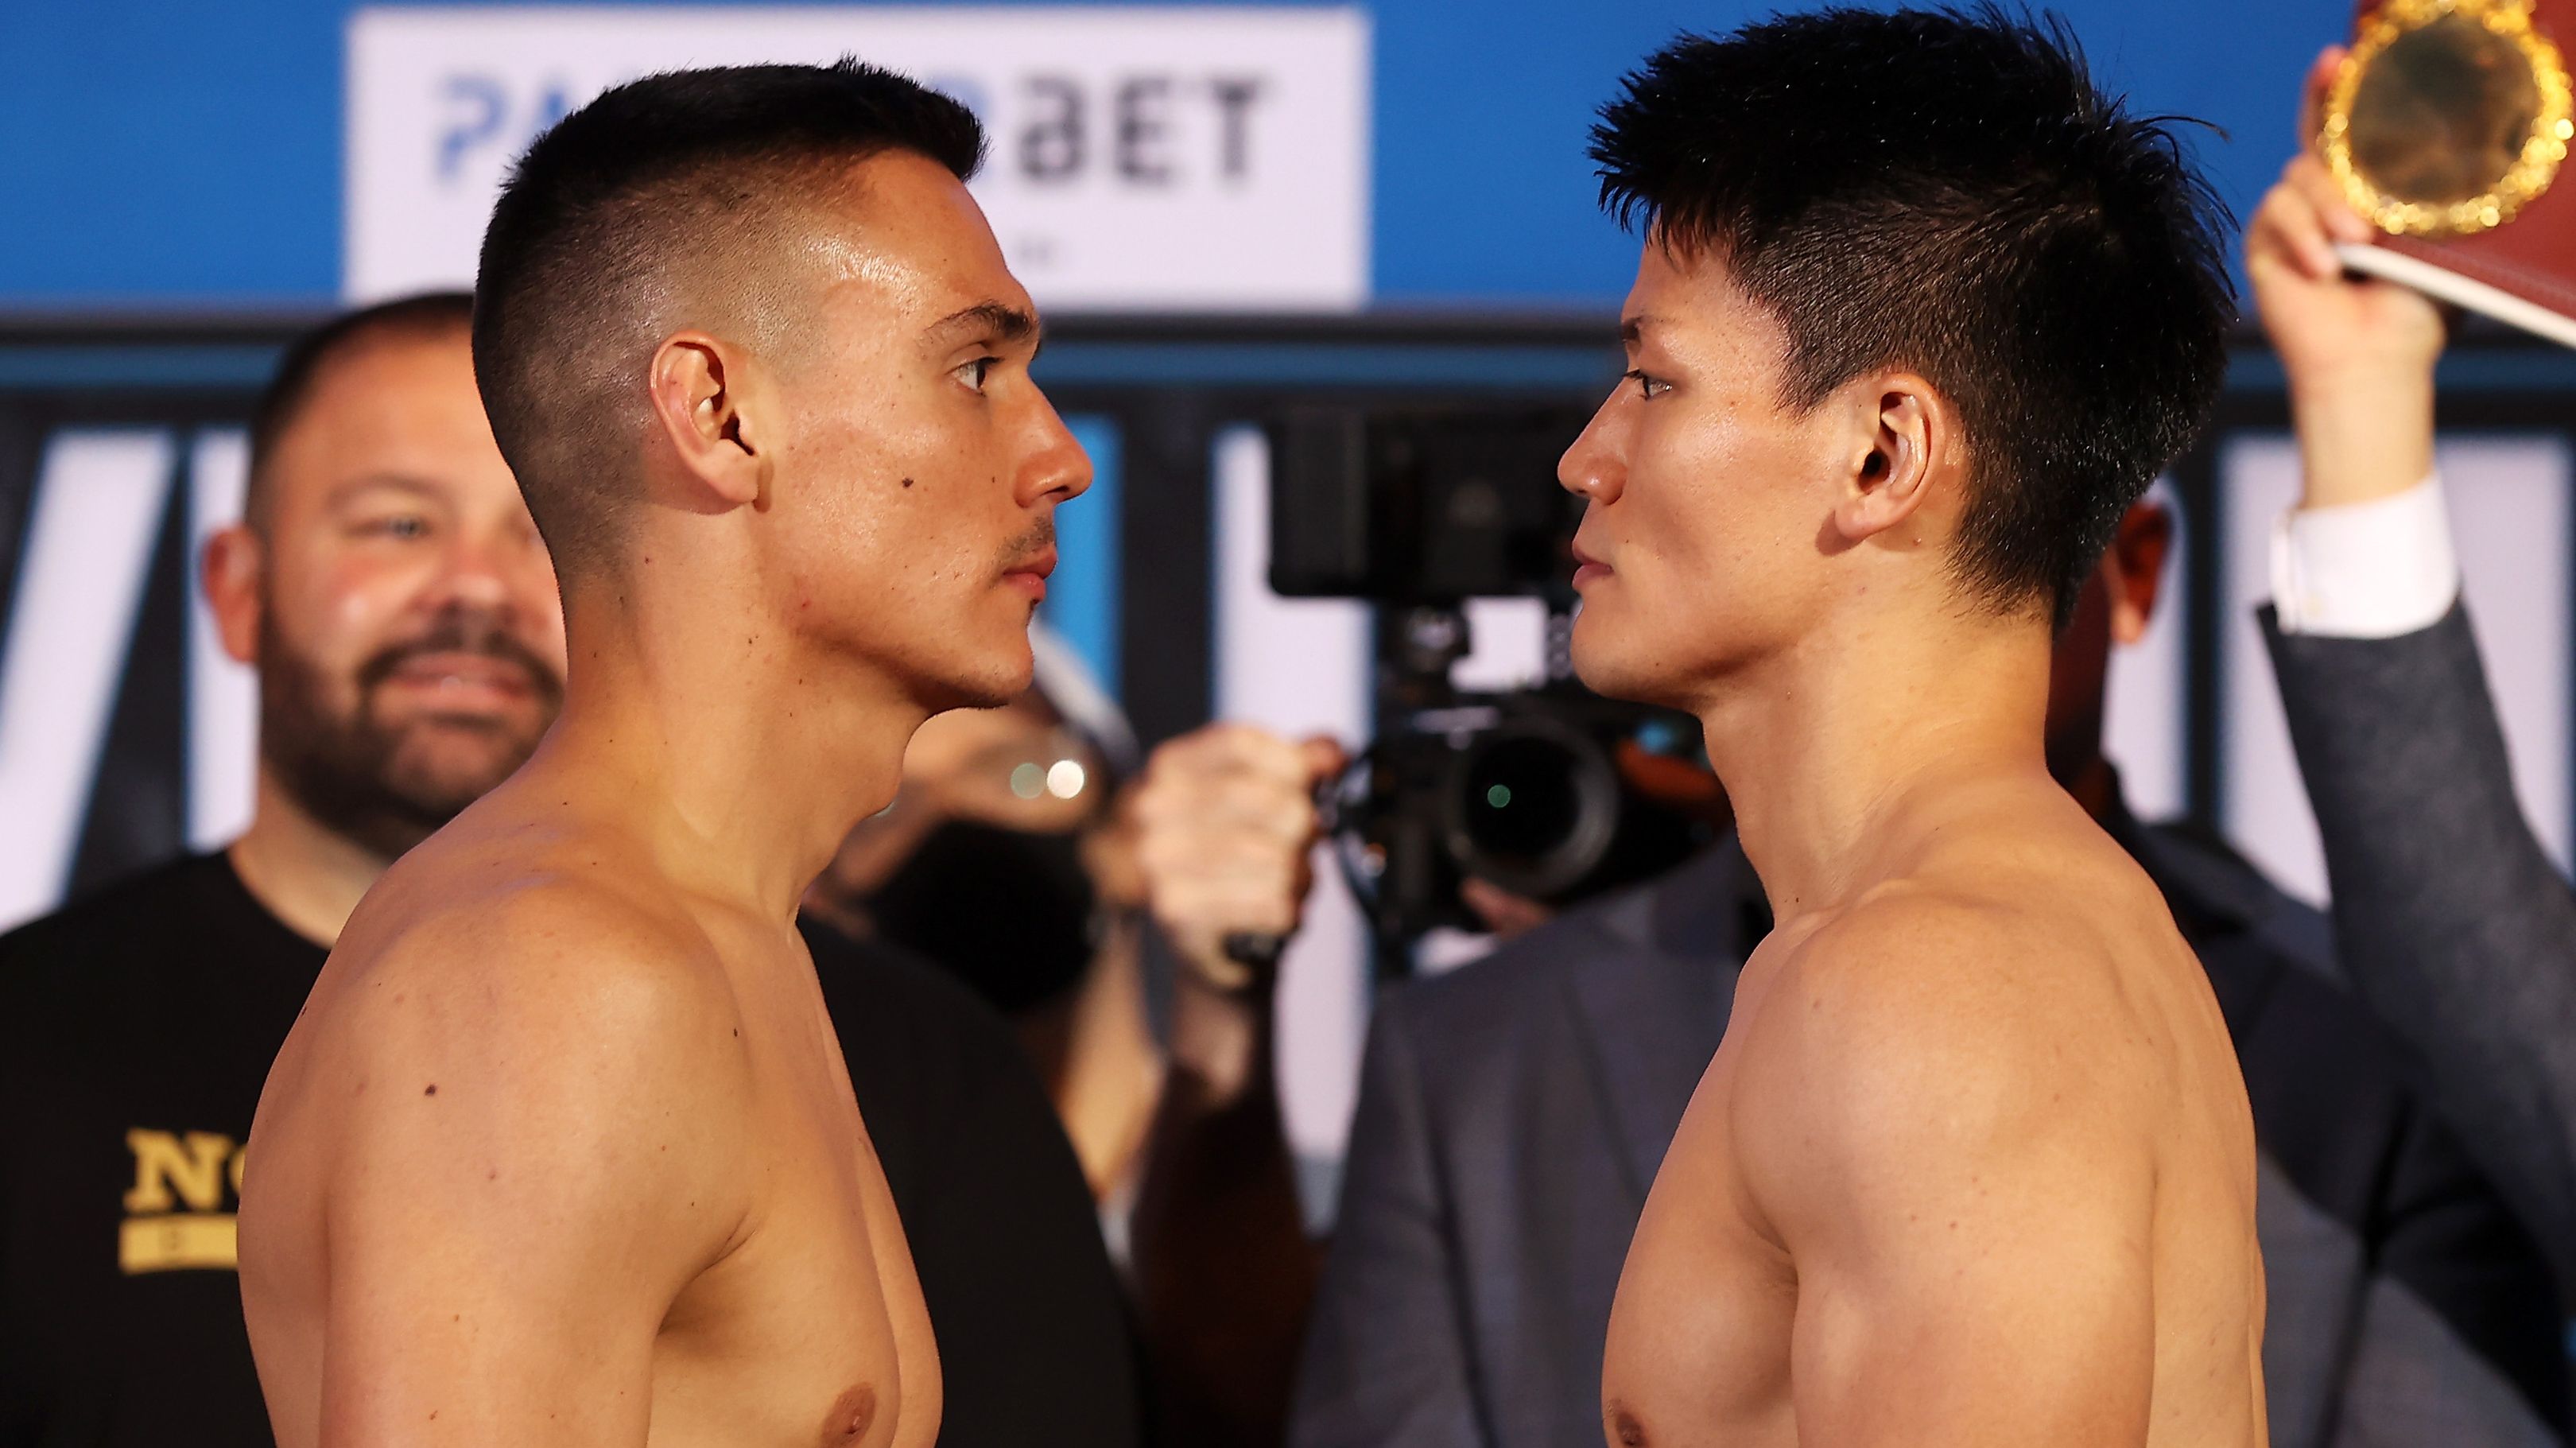 Tszyu 'coming for his head' after tense weigh-in